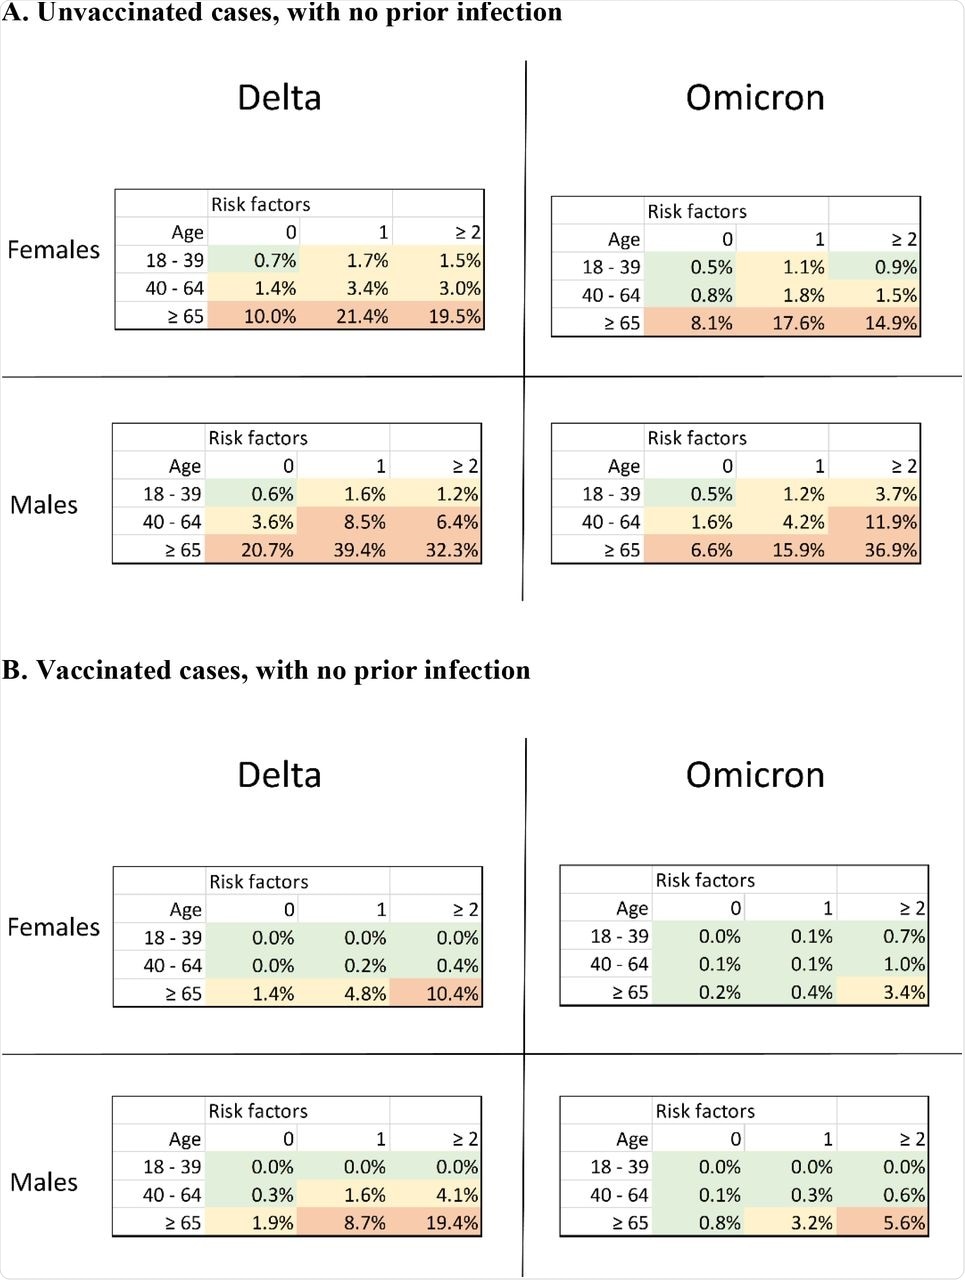 Risks of severe COVID-19 disease among A. unvaccinated, B. vaccinated cases with no prior infection during the Delta (2021 week 27-47) and Omicron period (2021 weerk 52-2022 week 1), stratified by sex, age and number of risk factors (comorbidities). Green represents risk < 1.0%, yellow 1.0 – 4.9%, orange ≥ 5.0%.